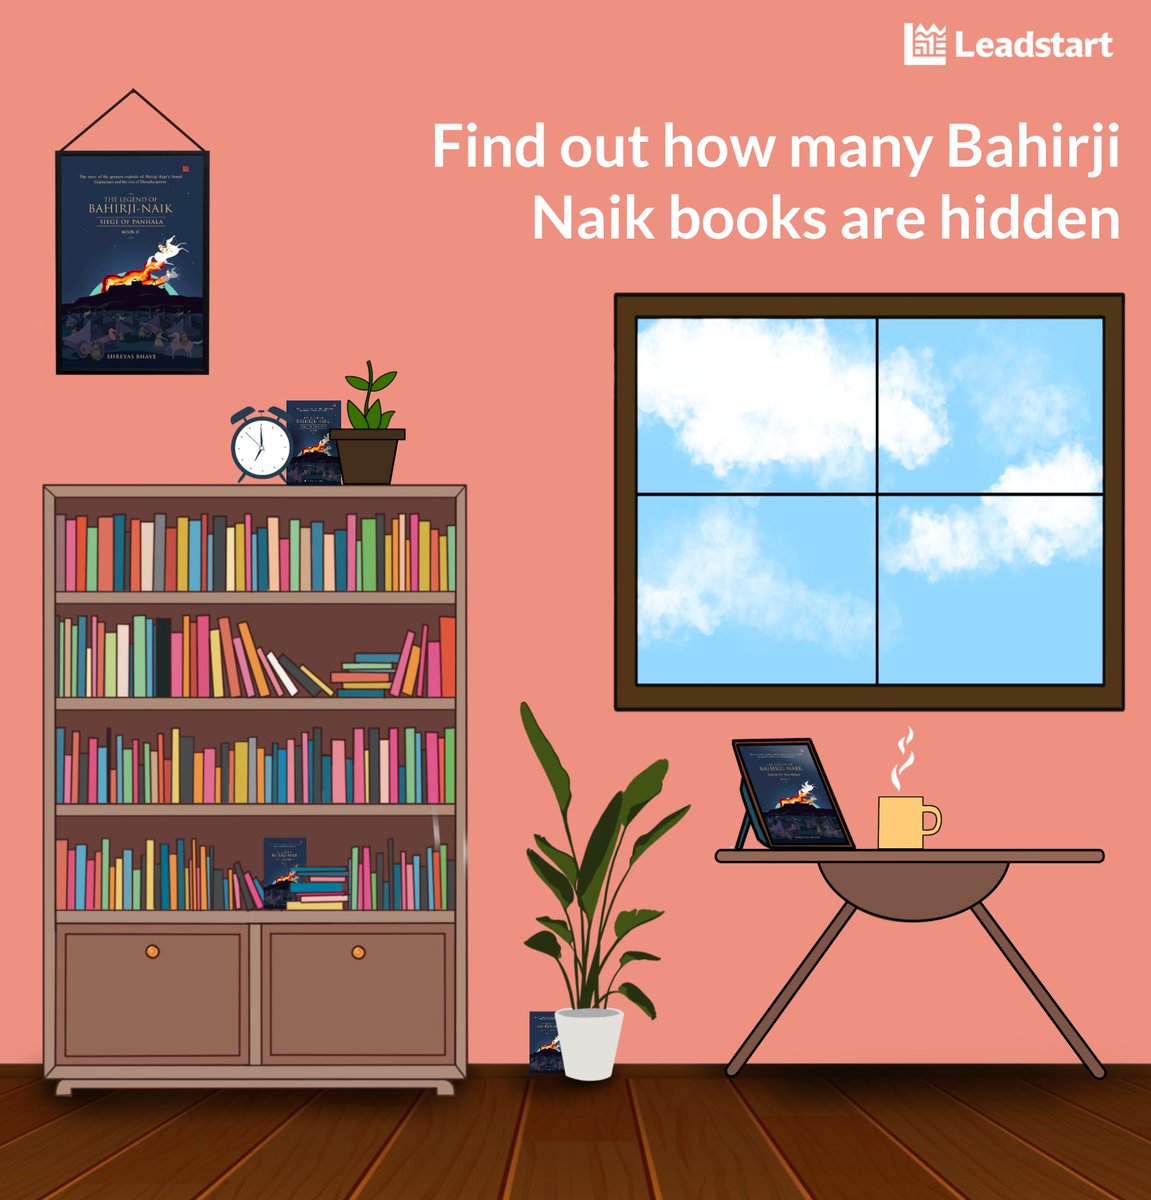 Let's see how many of you can get the no right!

#Leadstart #quizoftheday #puzzle #books #bookaholic #booknerd #booklover #booktoread #newpost #trending